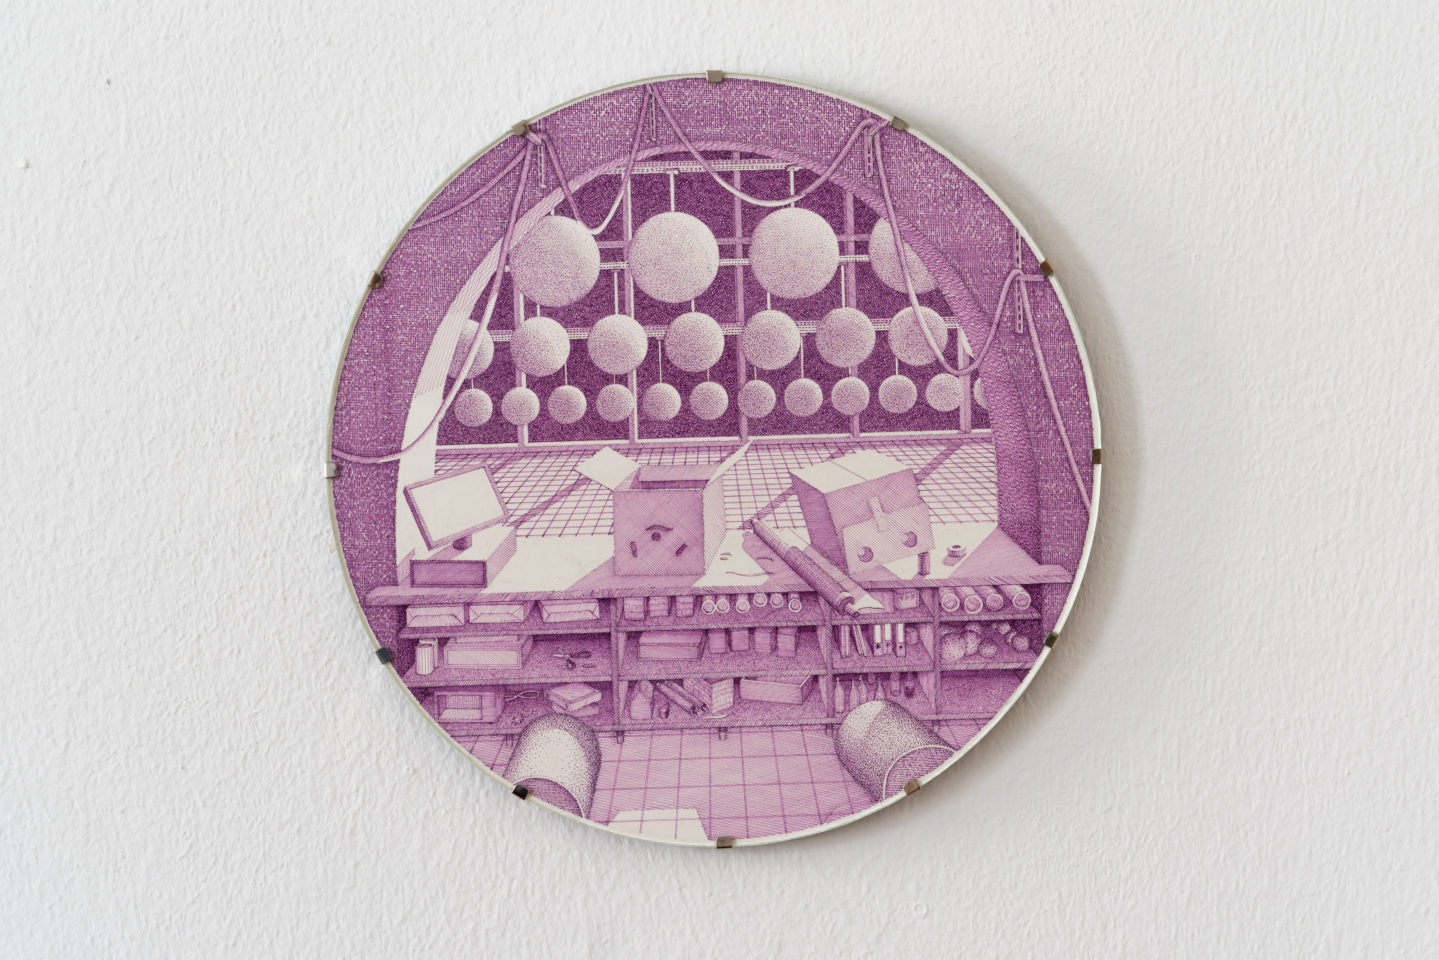 Wolfgang Matuschek, Untitled (Boxes 1), 2023
Ink on paper in aluminum uv glass clipframe, 25 cm (diameter)
Courtesy of the artist and Crèvecoeur, Paris.